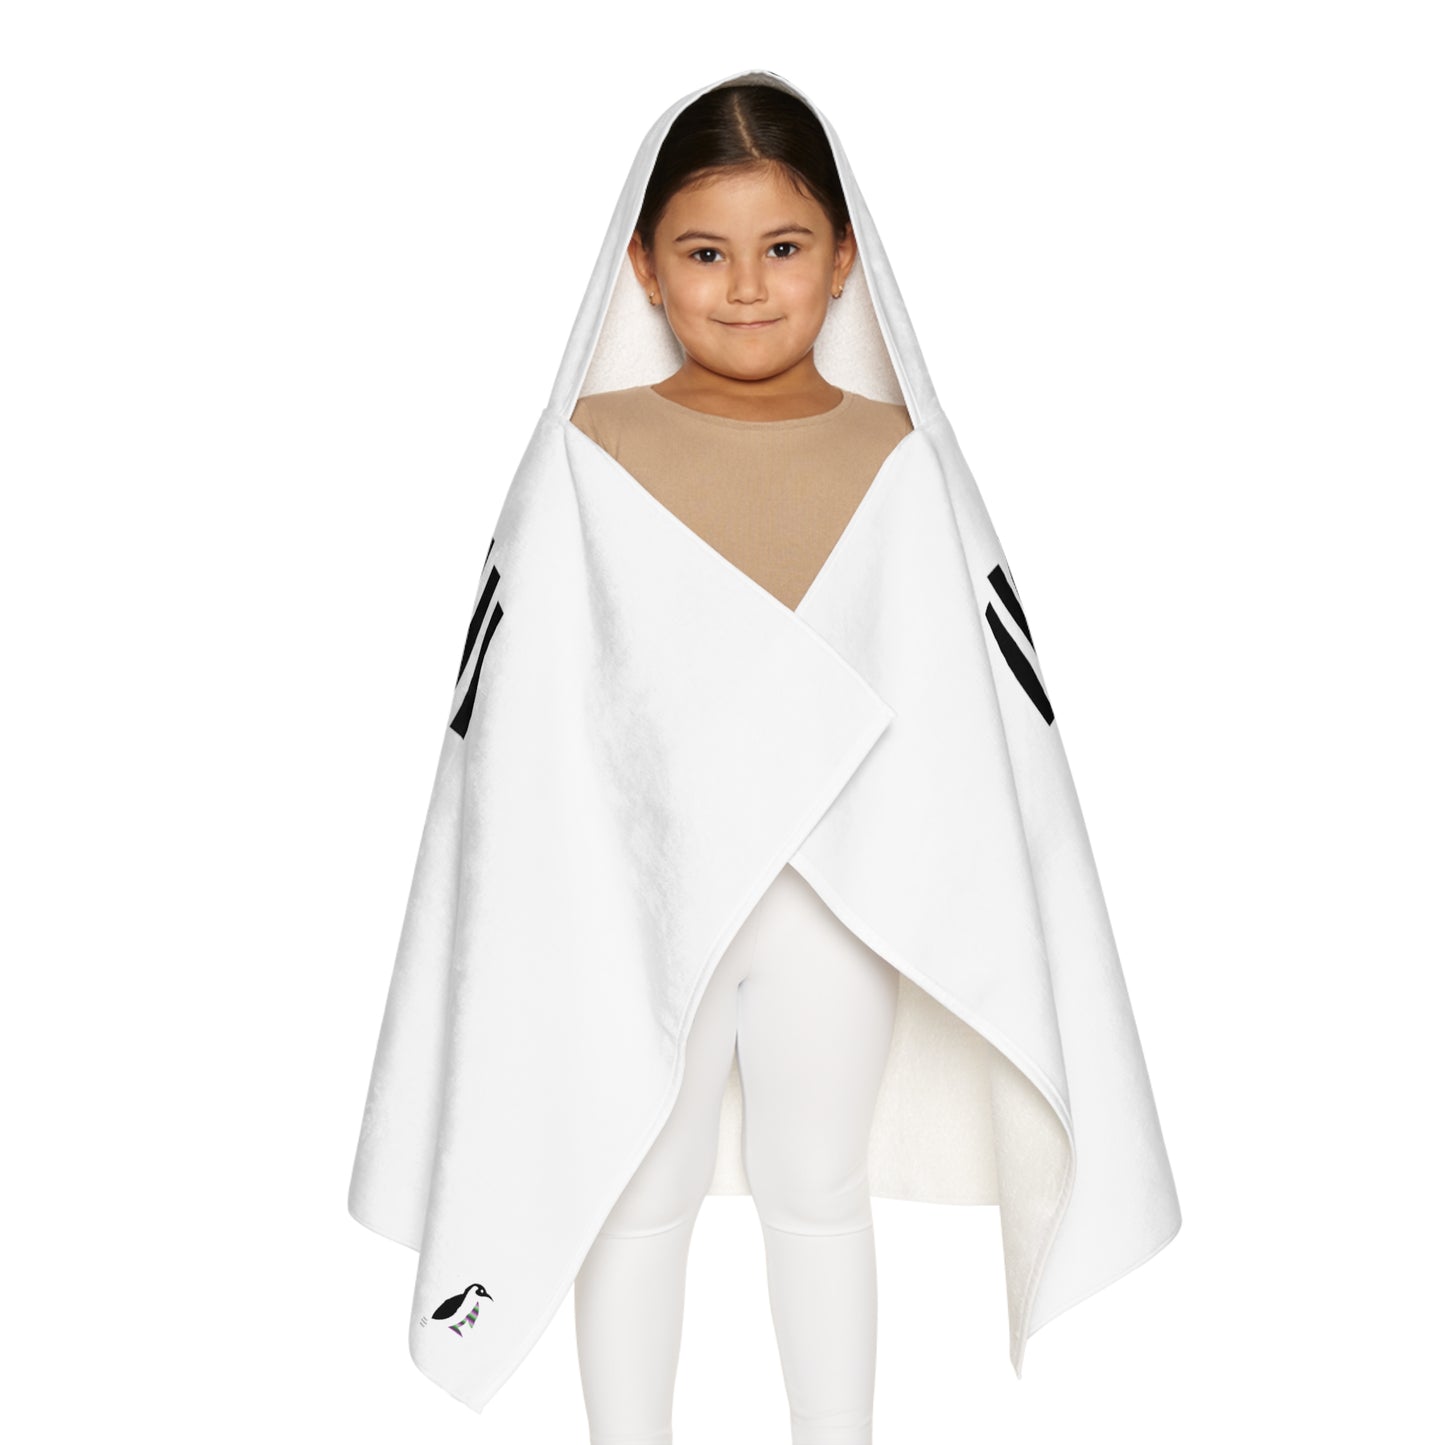 Youth Hooded Towel: Weightlifting White